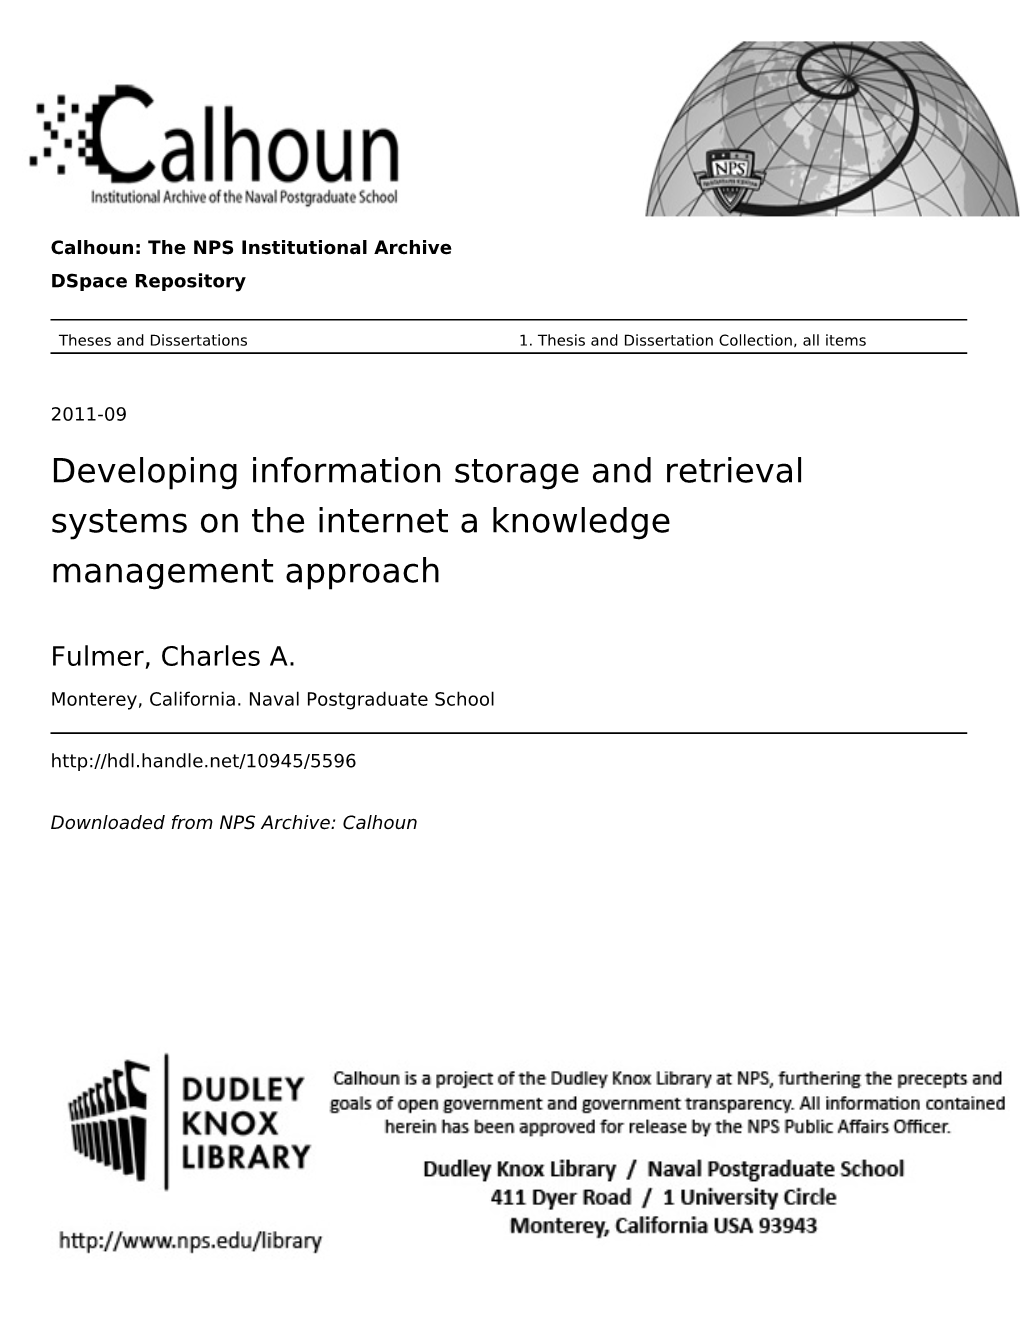 Developing Information Storage and Retrieval Systems on the Internet a Knowledge Management Approach